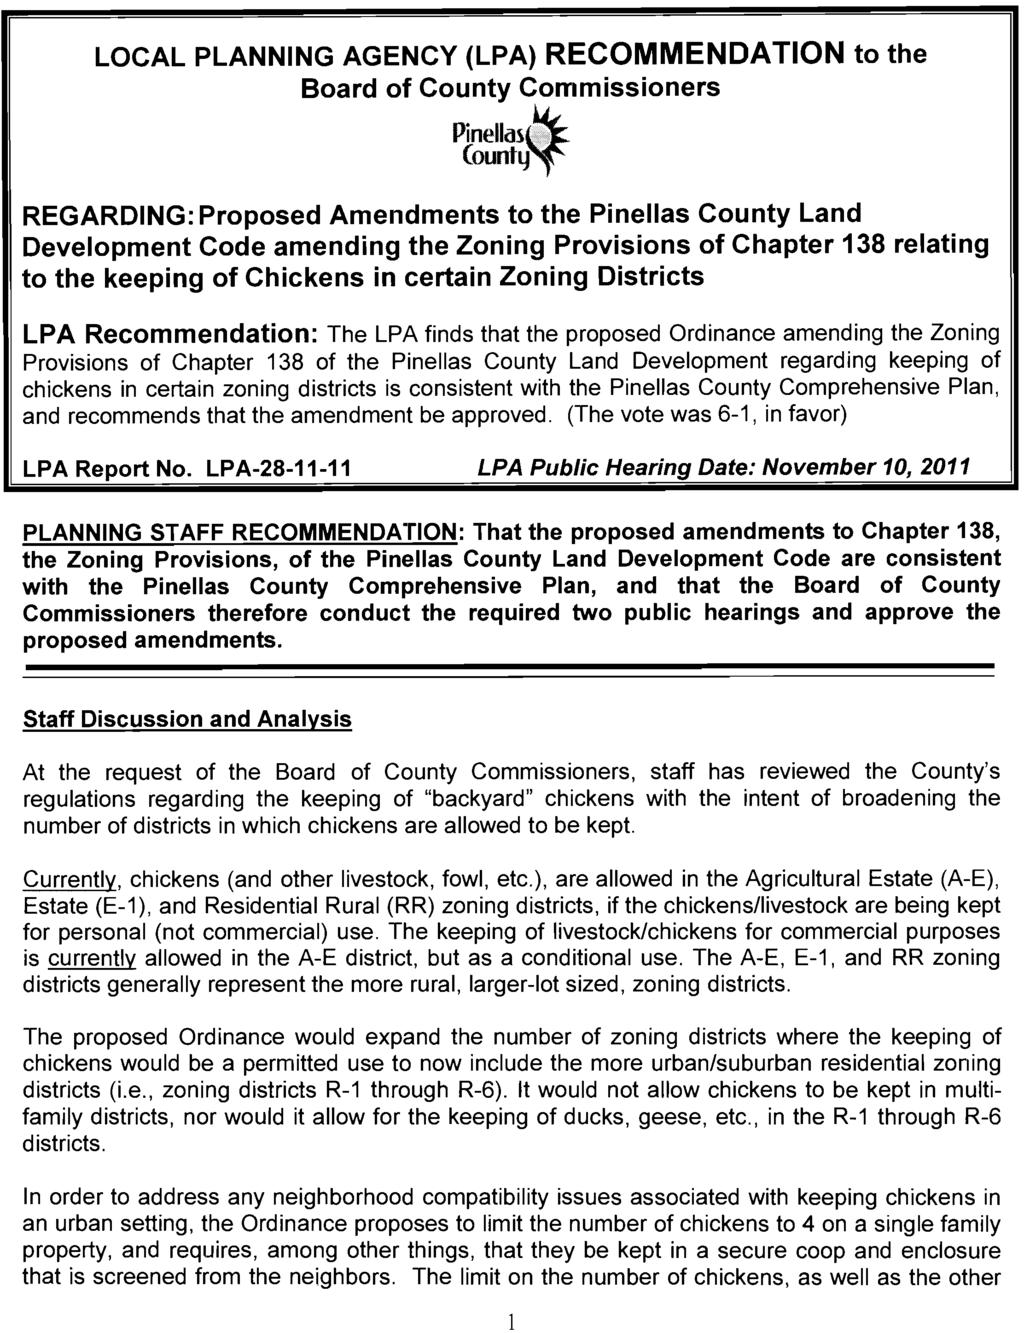 LOCAL PLANNING AGENCY (LPA) RECOMMENDATION to the Board of County Commissioners ~:~~ REGARDING: Proposed Amendments to the Pinellas County Land Development Code amending the Zoning Provisions of